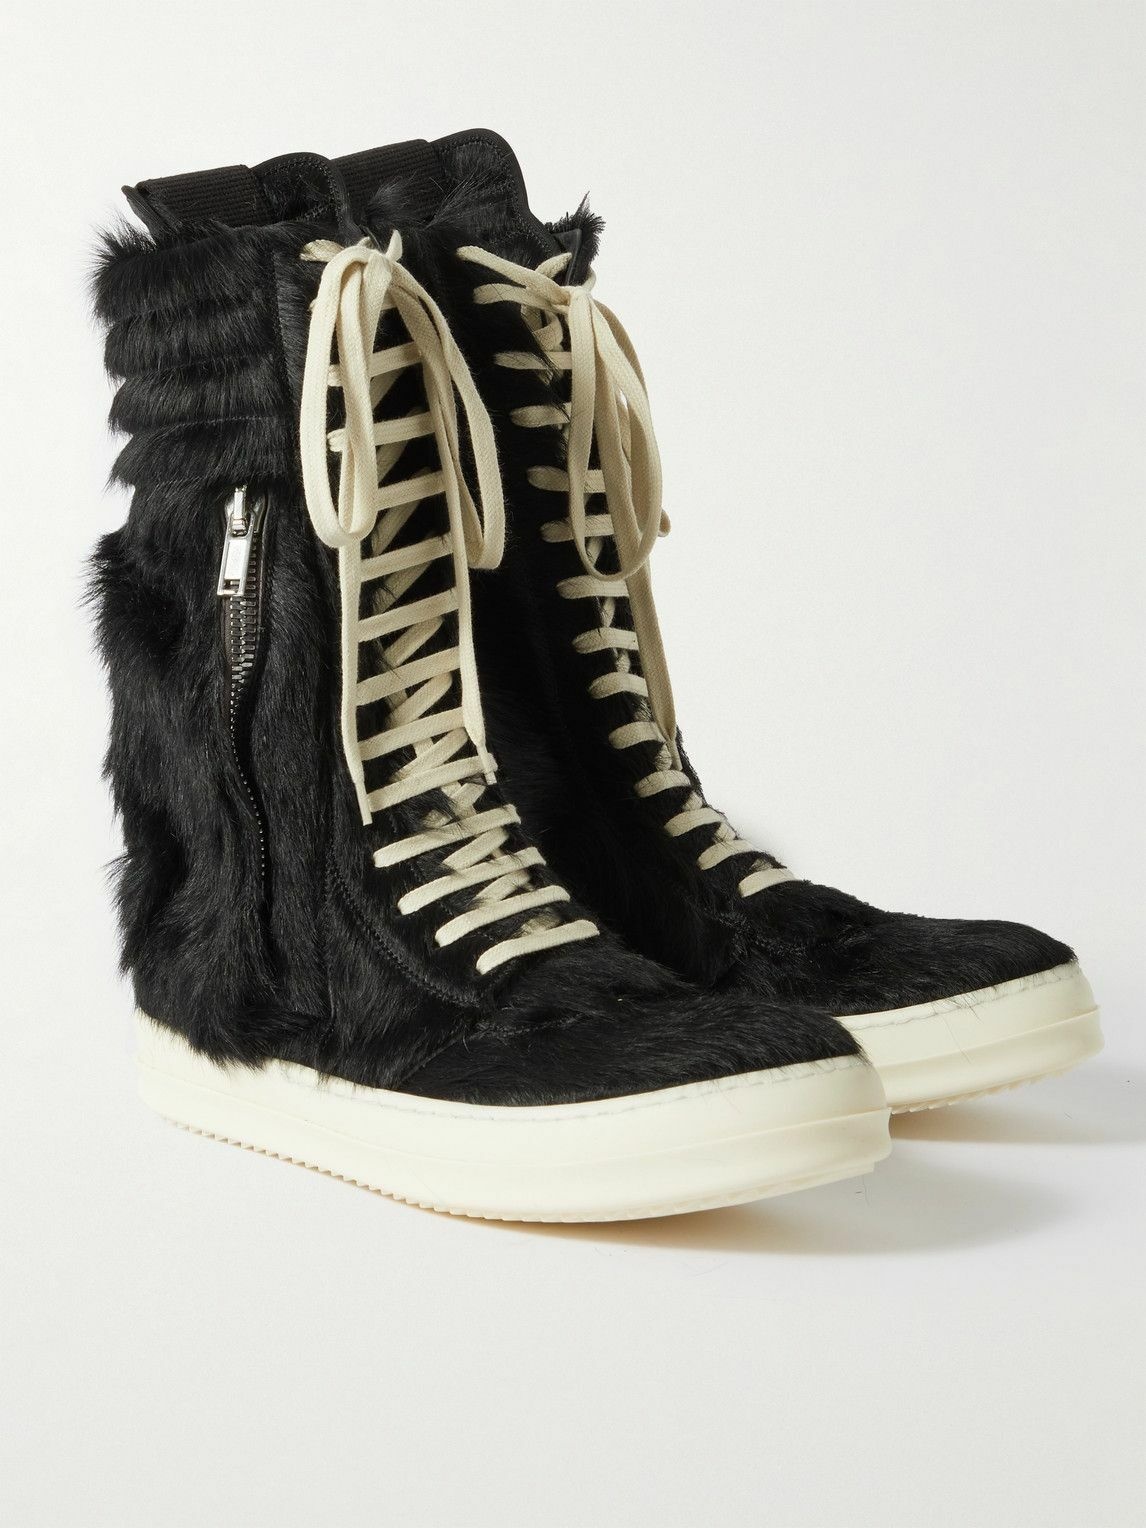 Rick Owens - Cargo Basket Faux Fur and Leather High-Top Sneakers